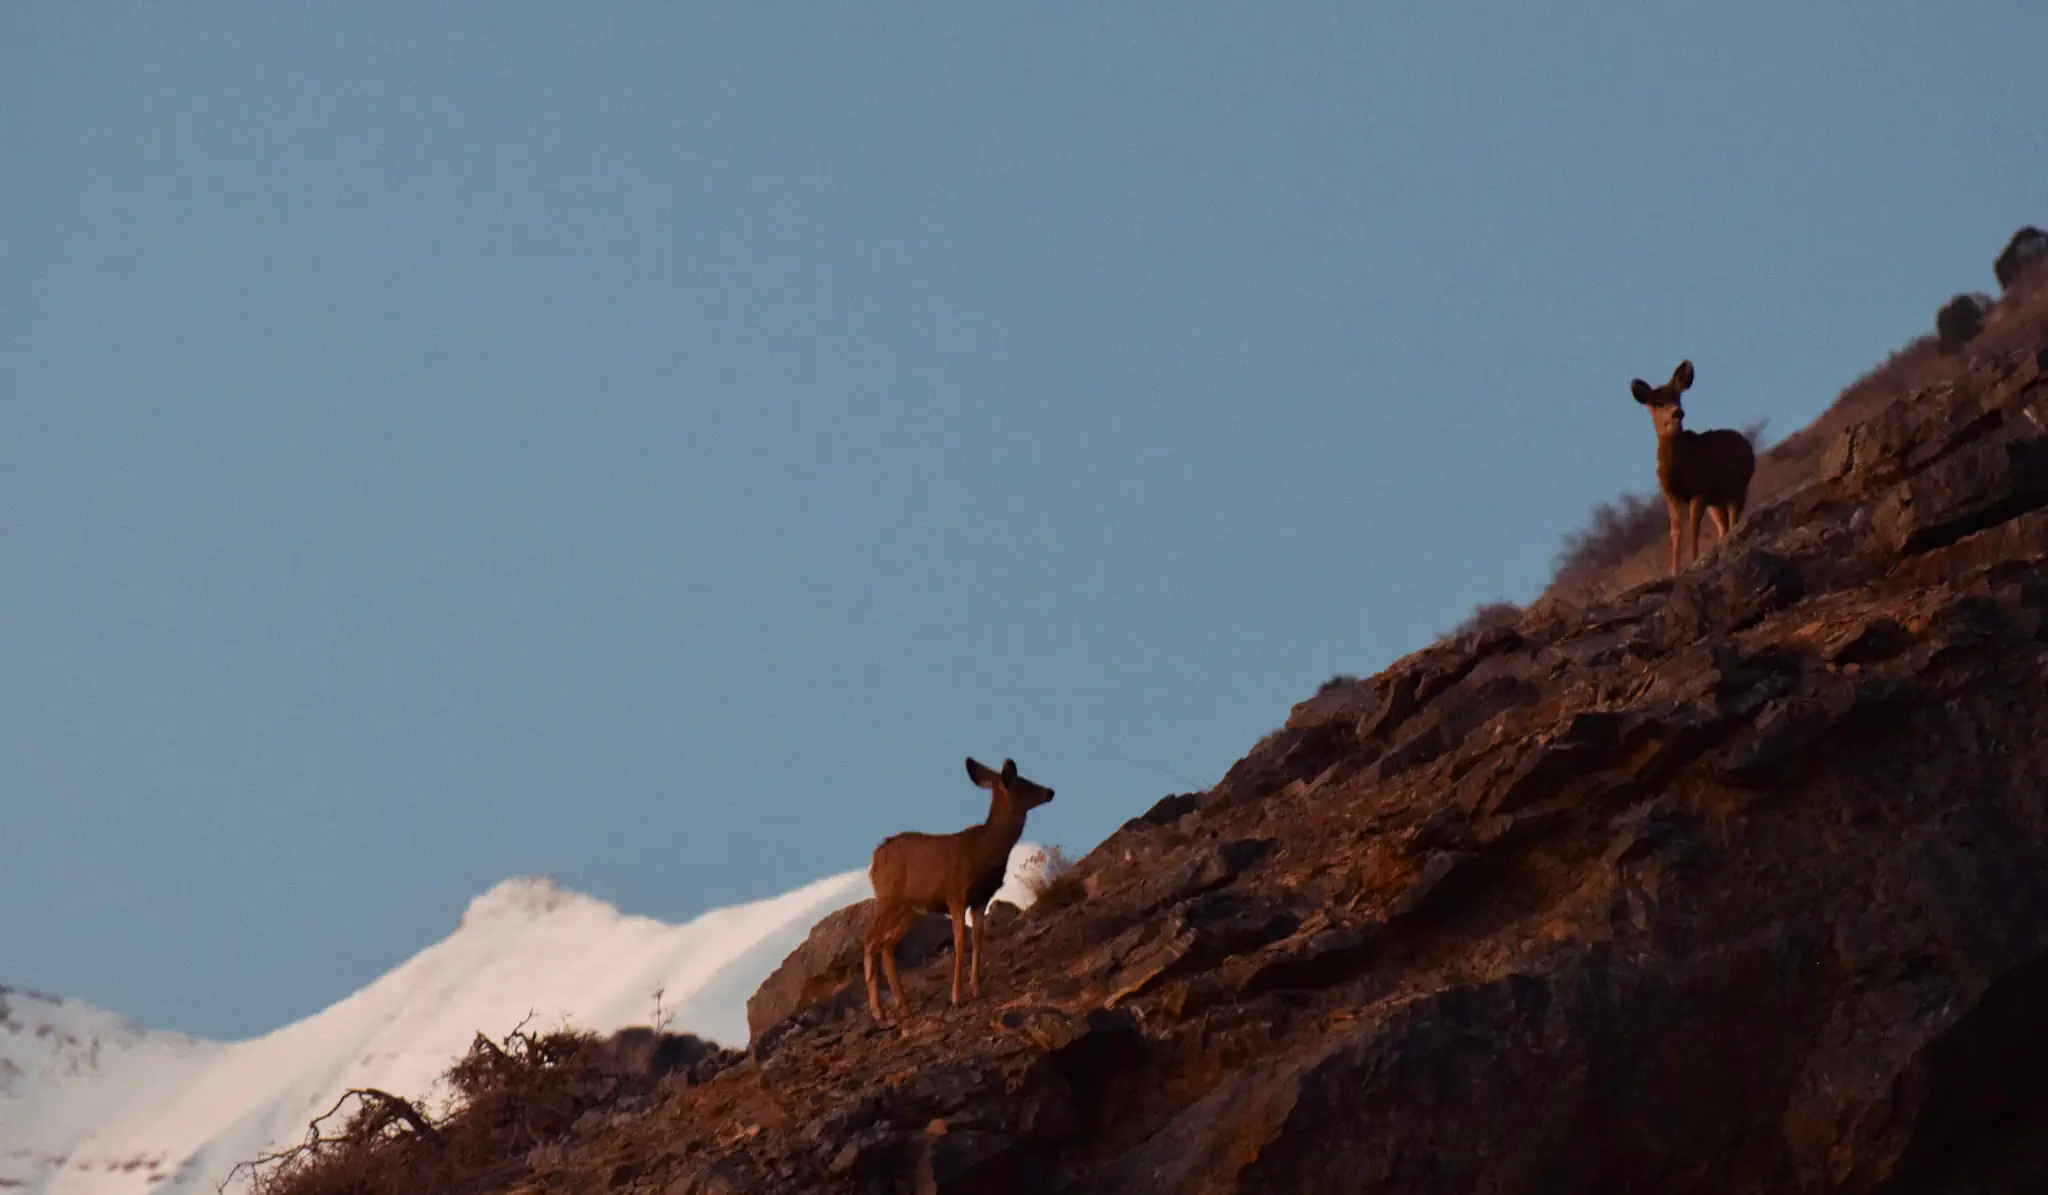 Two deer stand on a steep mountain slope. The mountain is reddened by the sunset, and cuts the image in half diagonally, with the other half being dominated by a pale blue sky. In the bottom, behind the front slope, lies a tall, snow-covered peak.